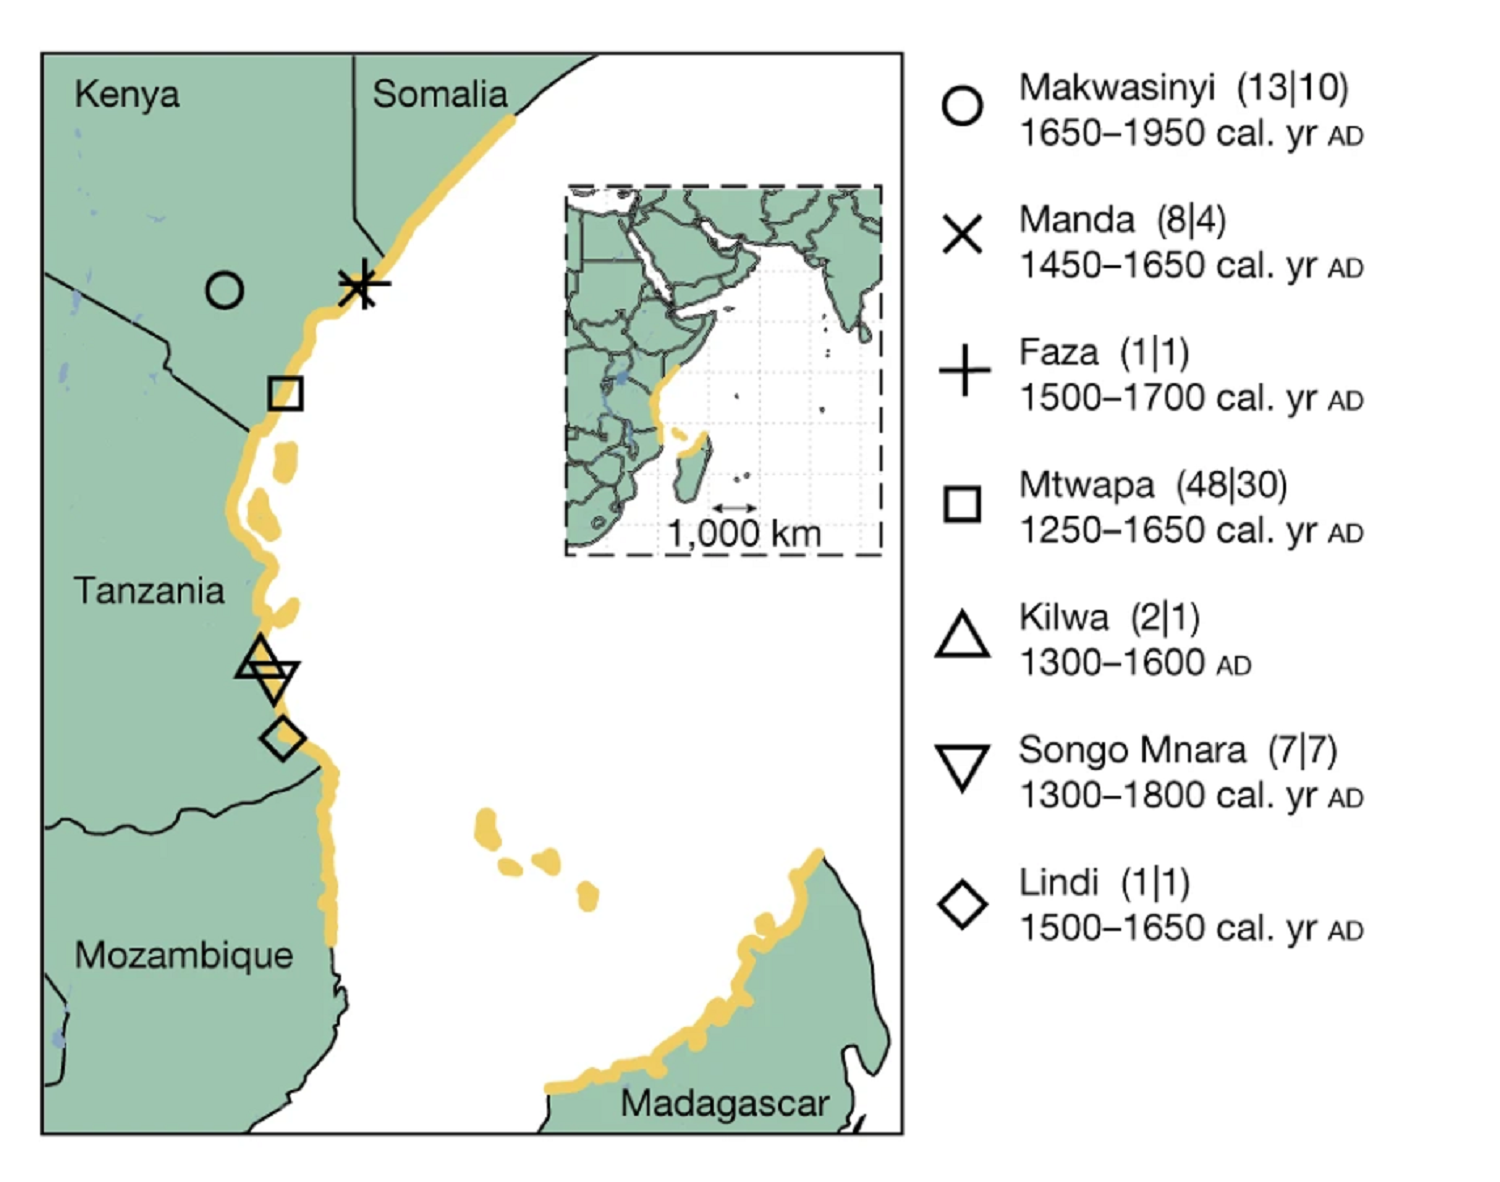 East Africa map with times of different culture's arrivals in gold symbols